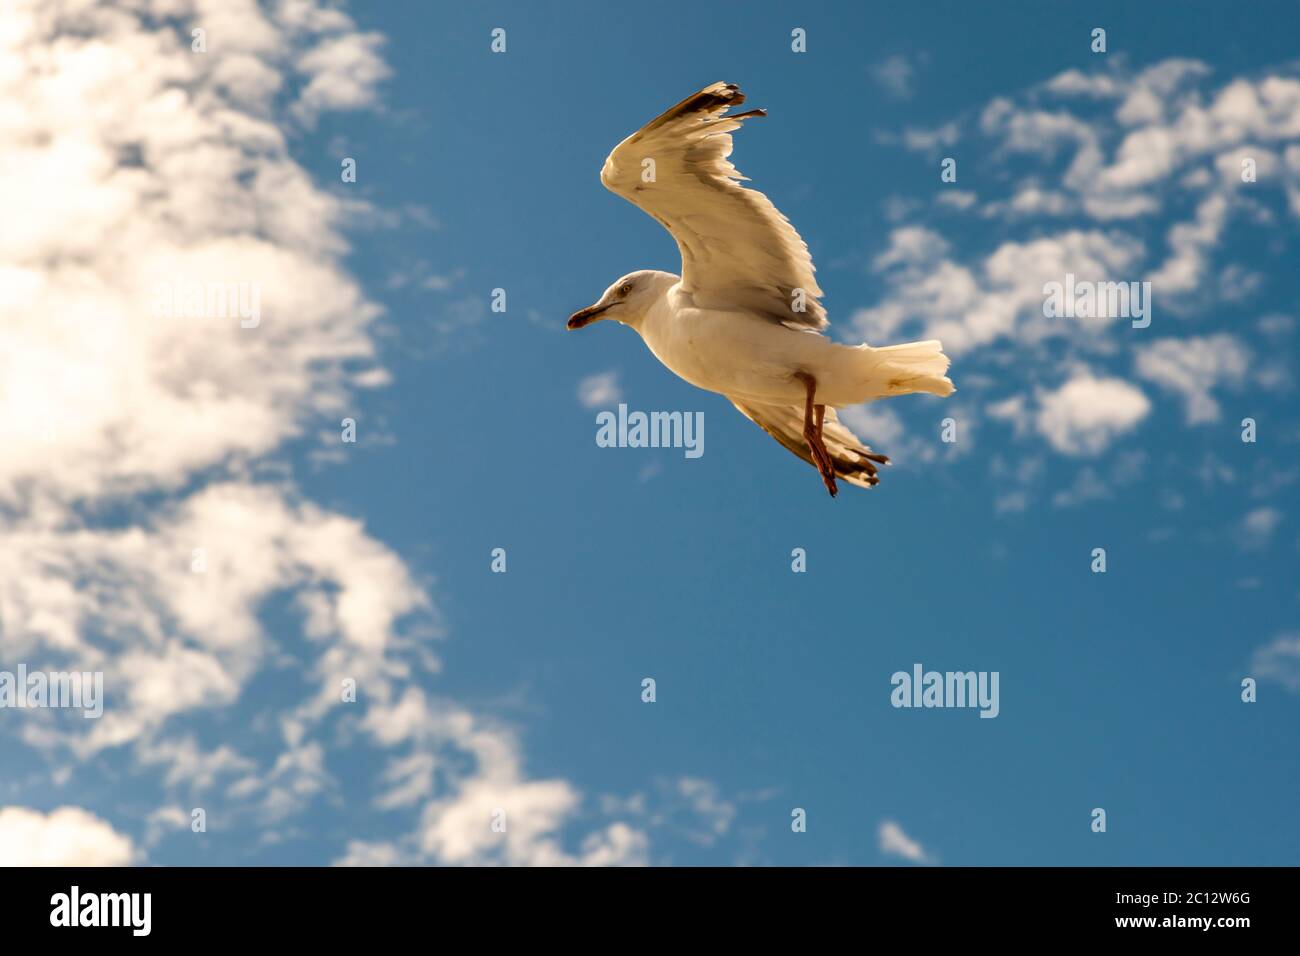 Flying Seagull Stock Photo